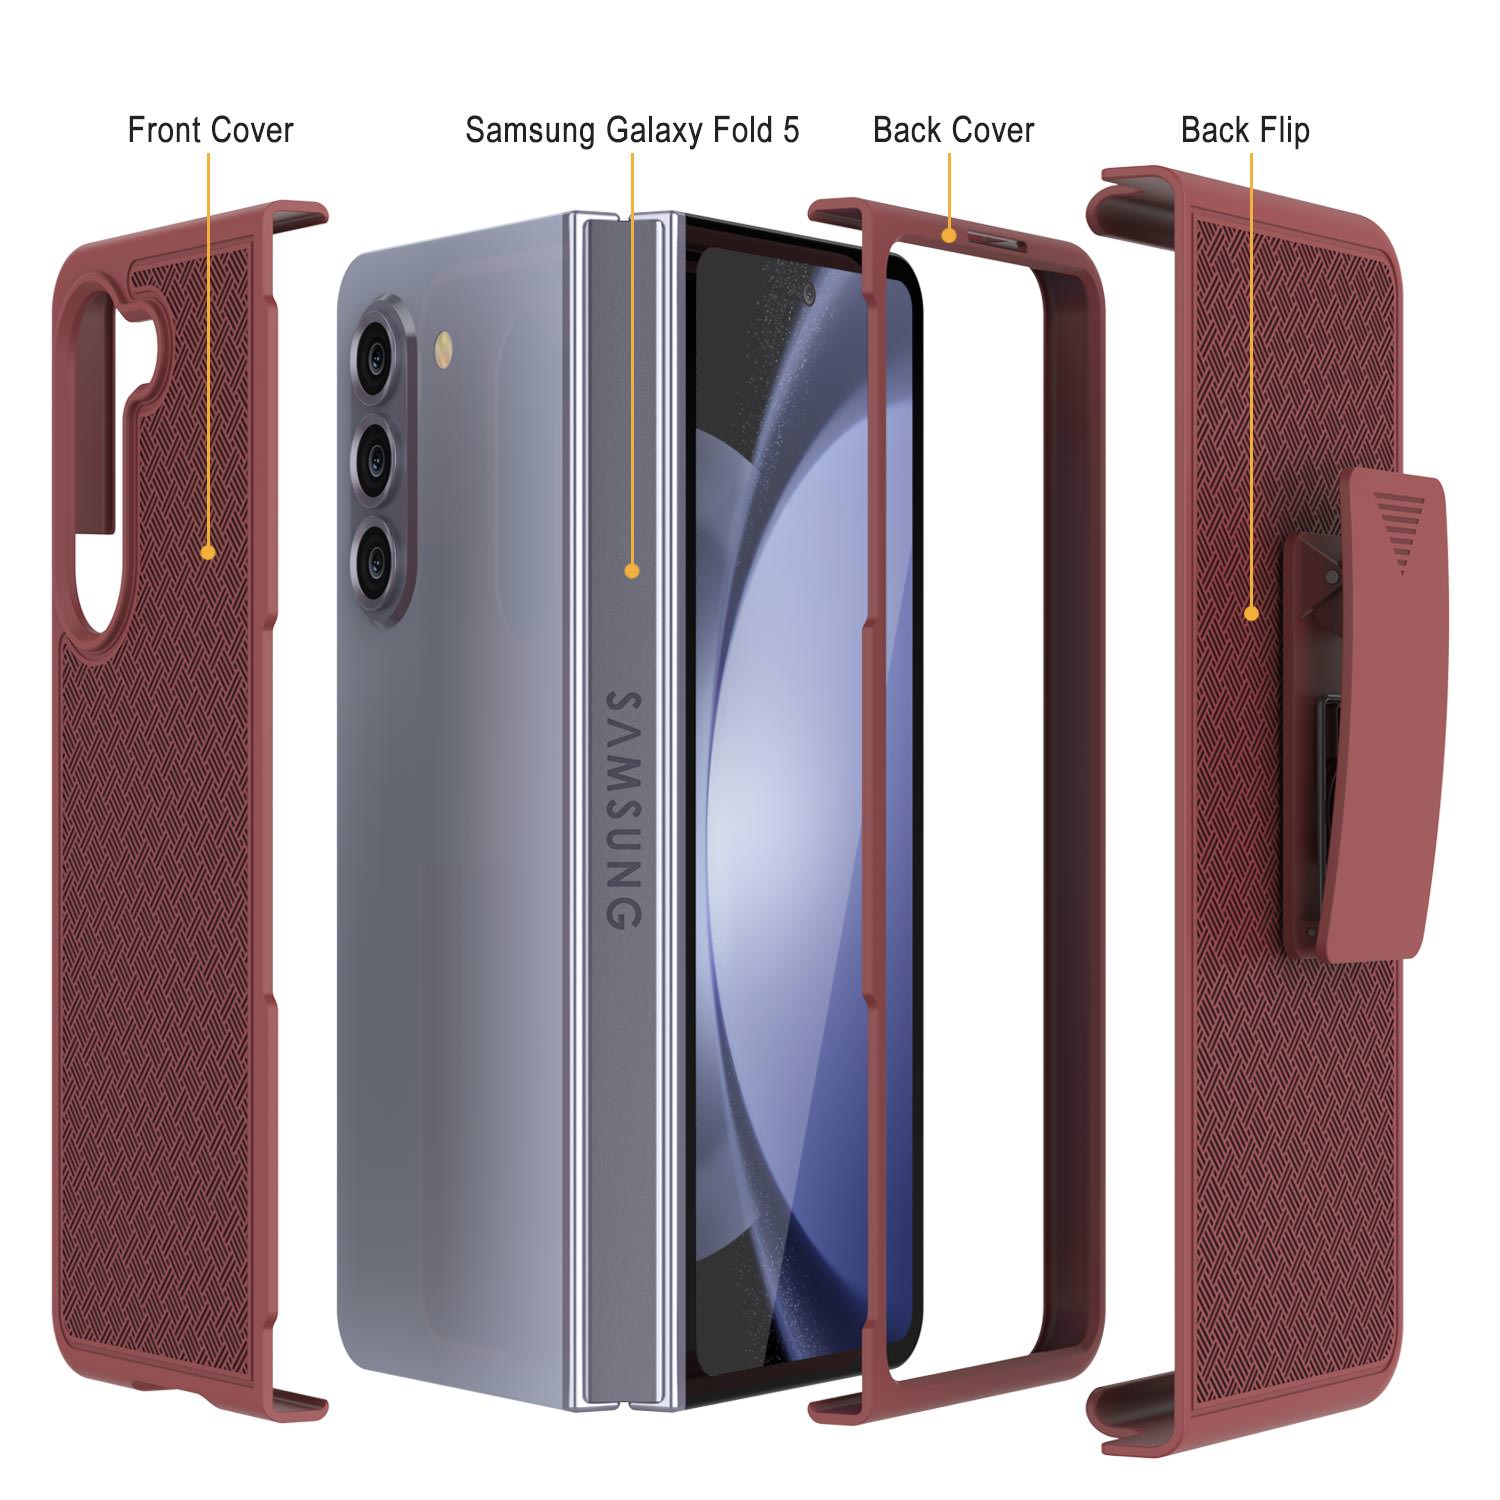 Galaxy Z Fold5 Case With Tempered Glass Screen Protector, Holster Belt Clip & Built-In Kickstand [Red]